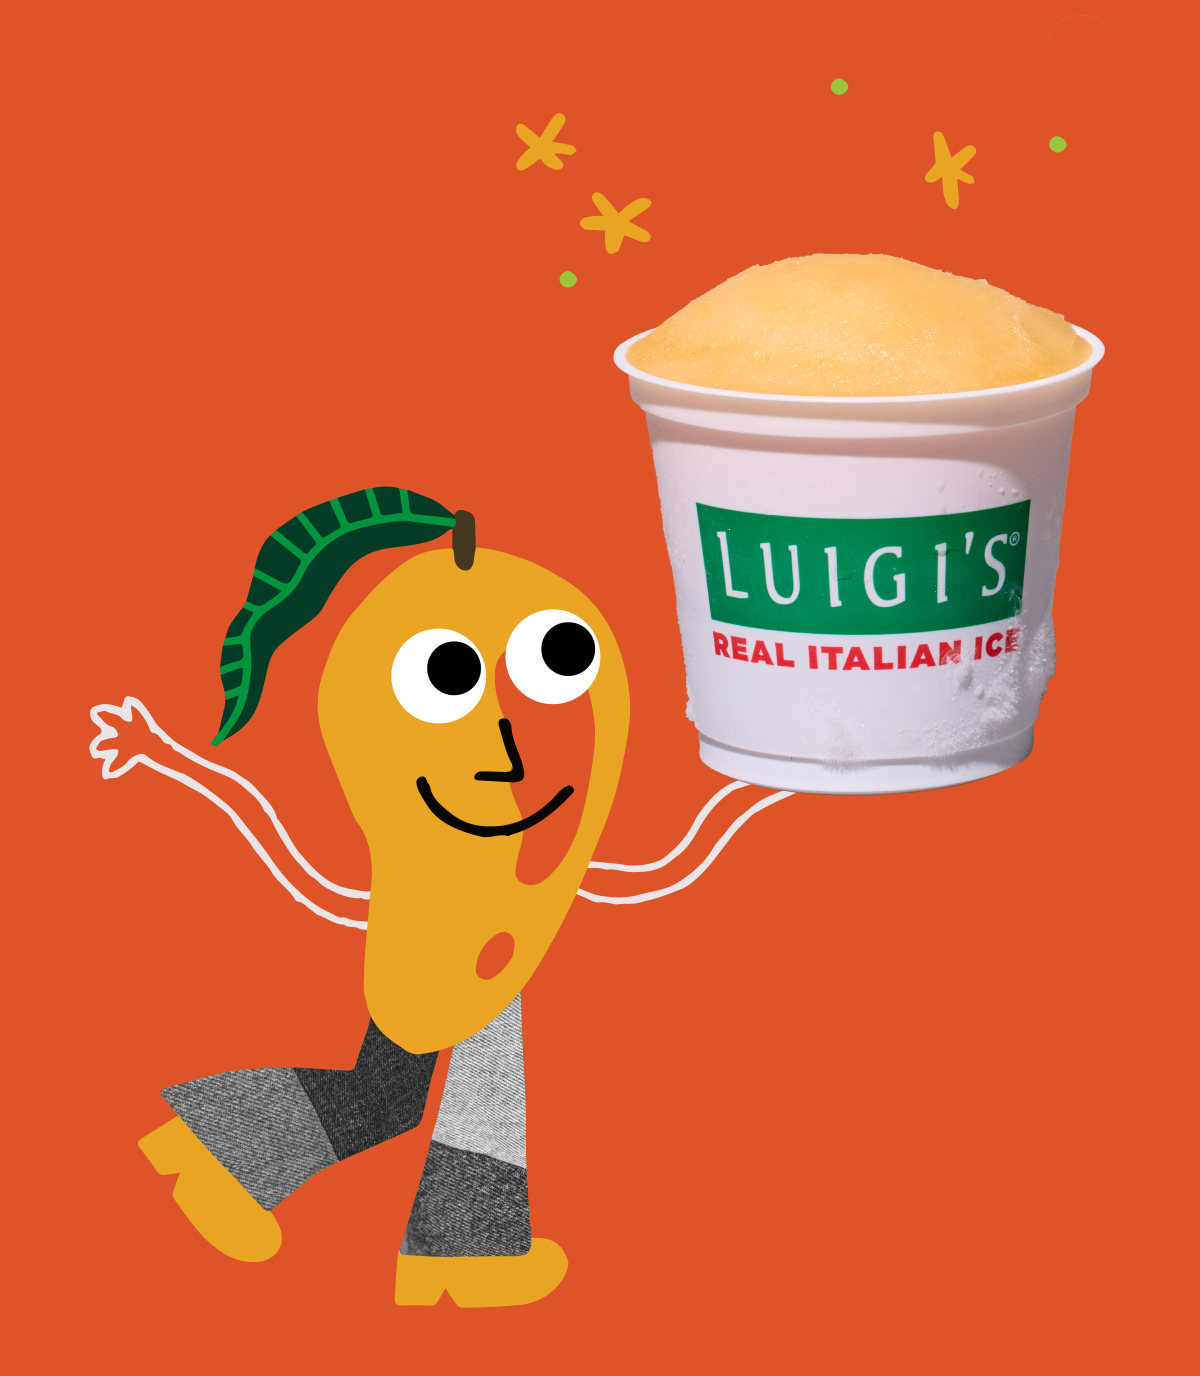 Mango graphic character is smiling and holding a cup of mango LUIGI'S Real Italian Ice. Orange background and light orange stars around cup. Mango is wearing pants and shoes and has a leaf for hair.